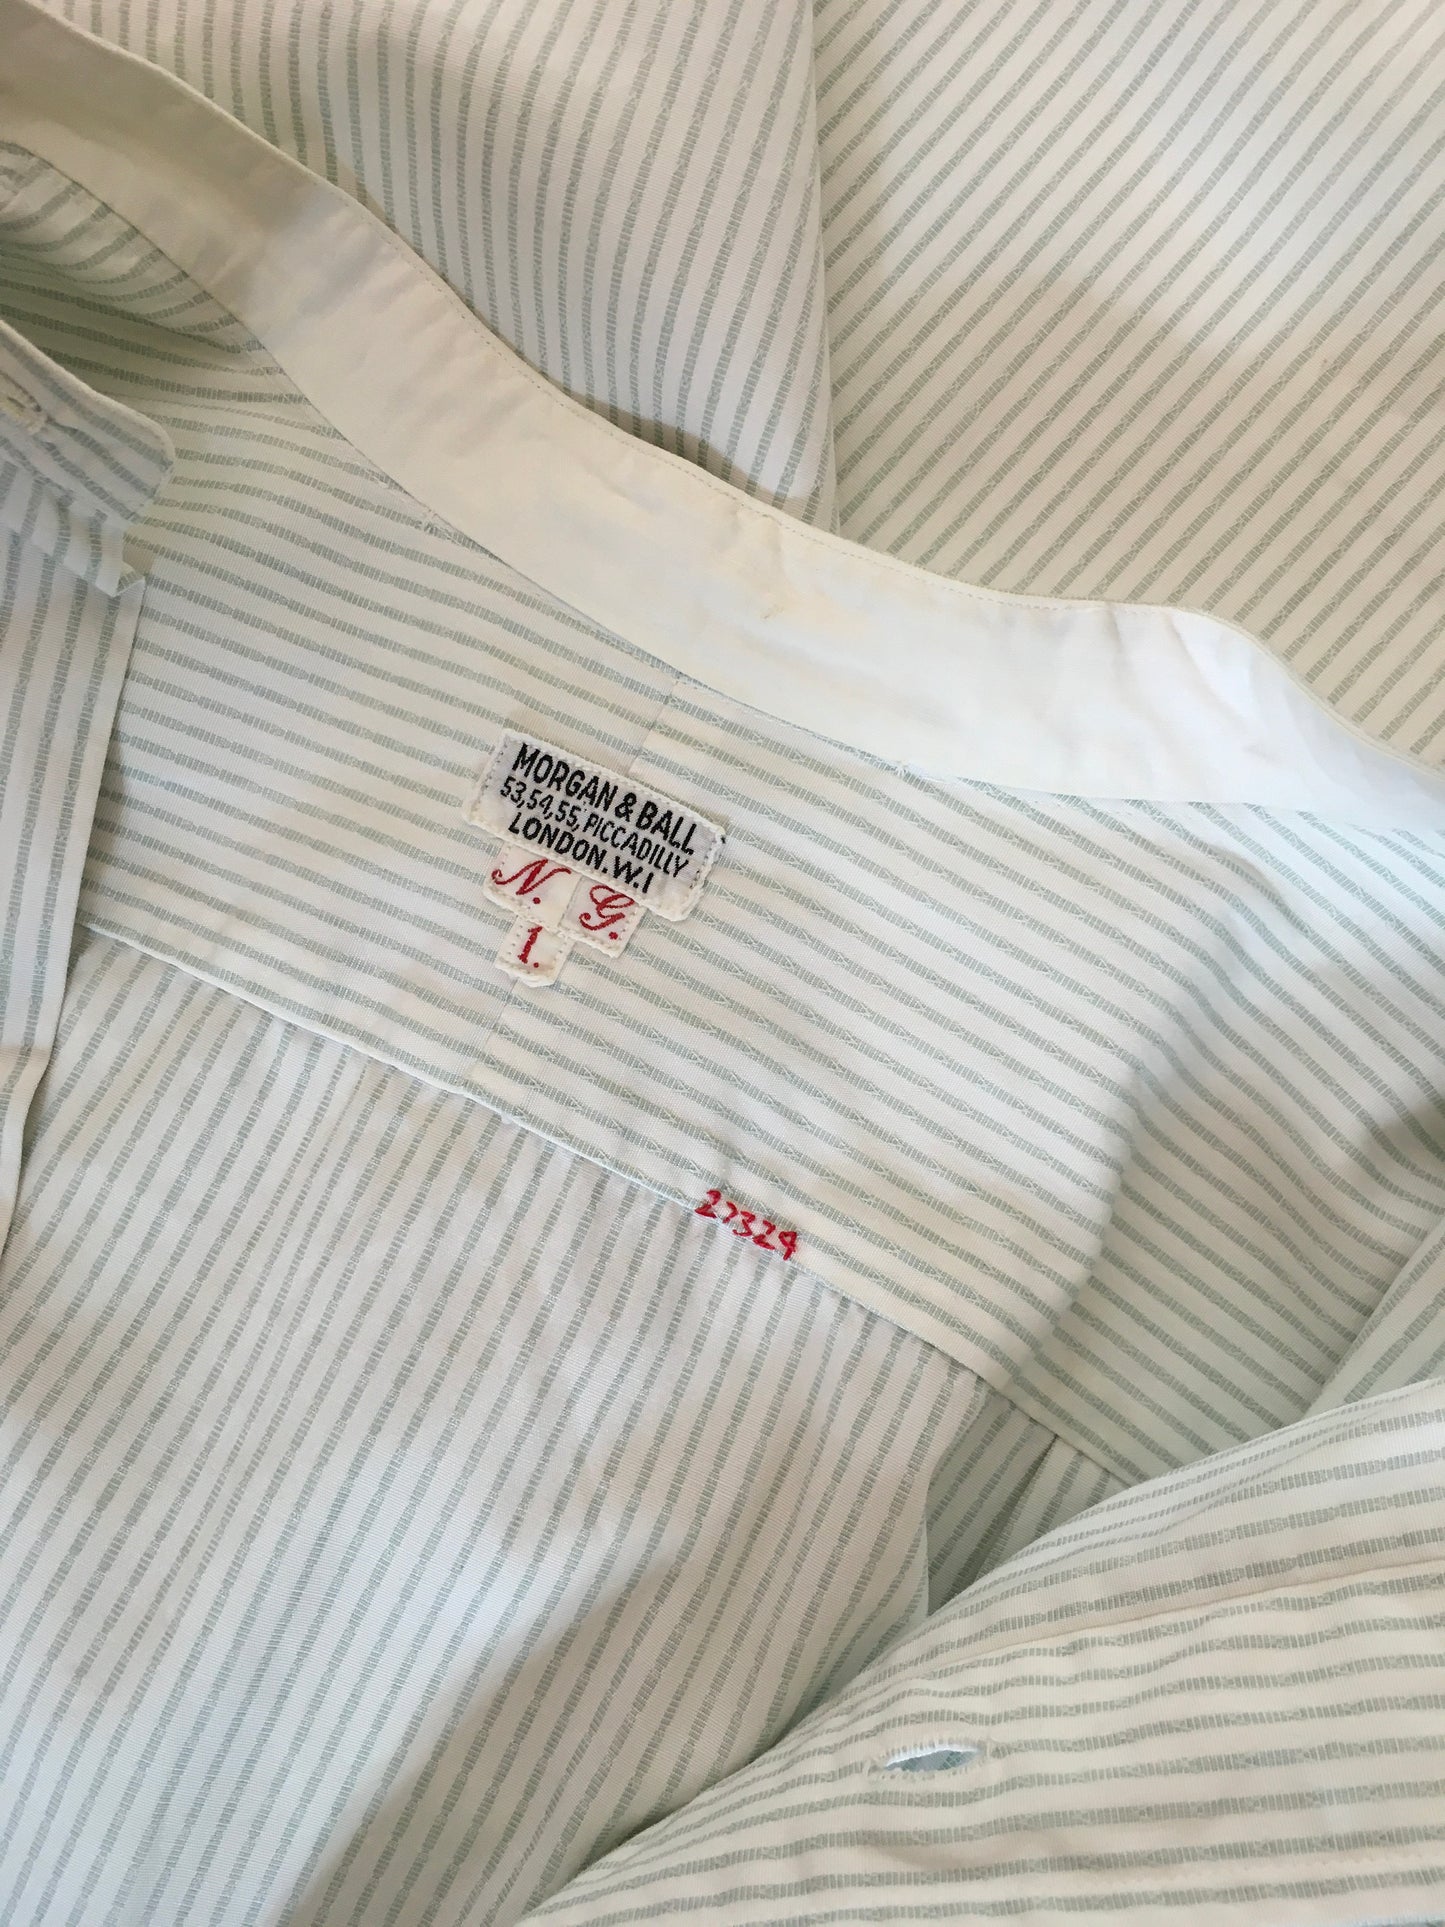 Original Gents Collarless Shirt by ‘ Morgan and Ball London’ - In a lovely Duck Egg Blue Stripe